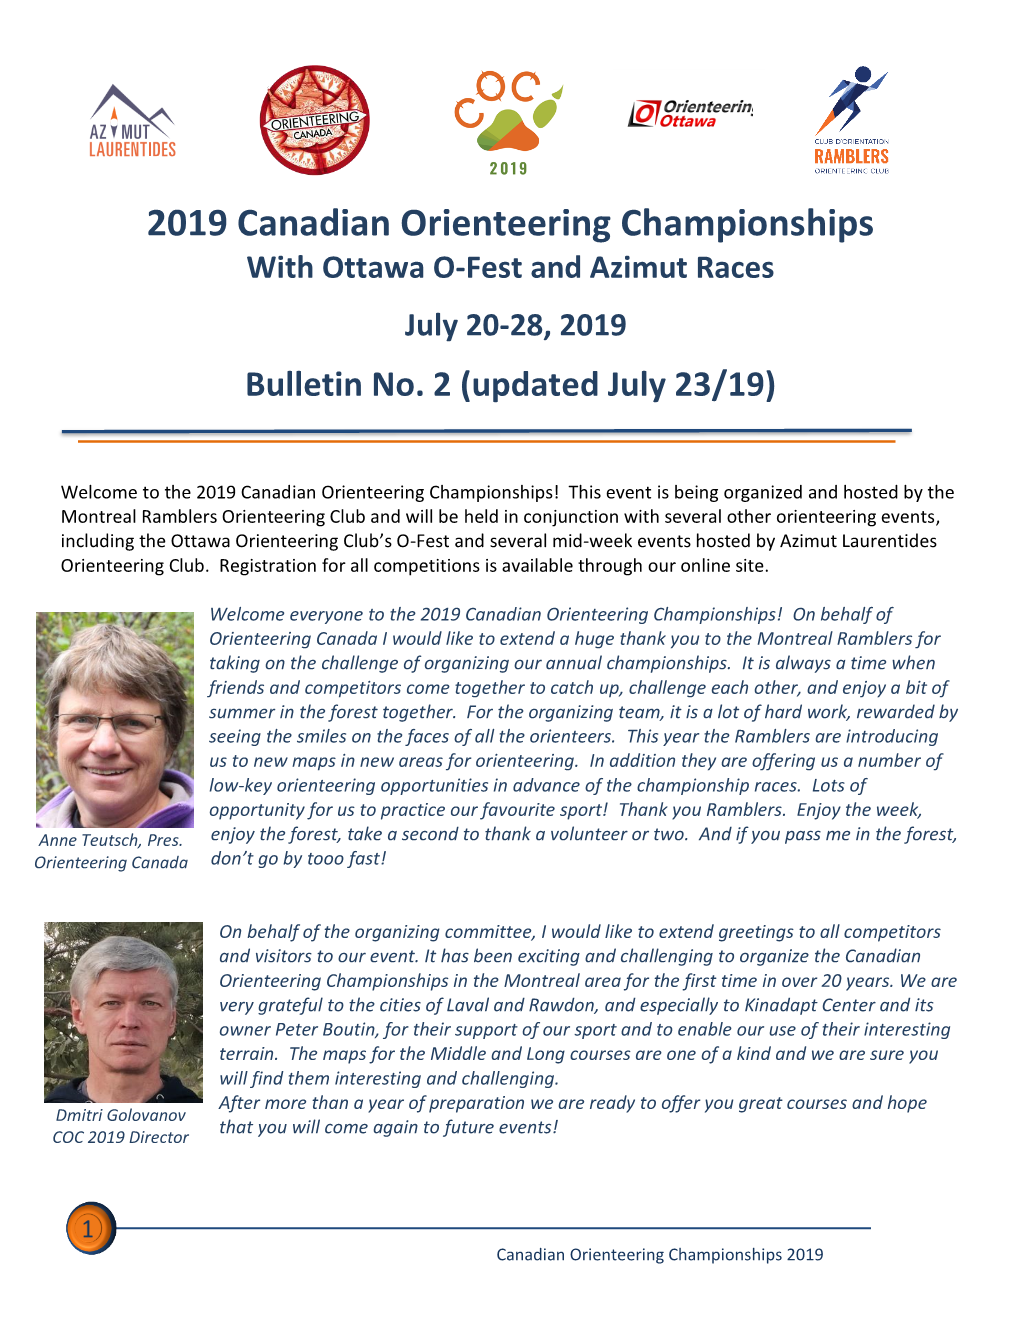 2019 Canadian Orienteering Championships with Ottawa O-Fest and Azimut Races July 20-28, 2019 Bulletin No